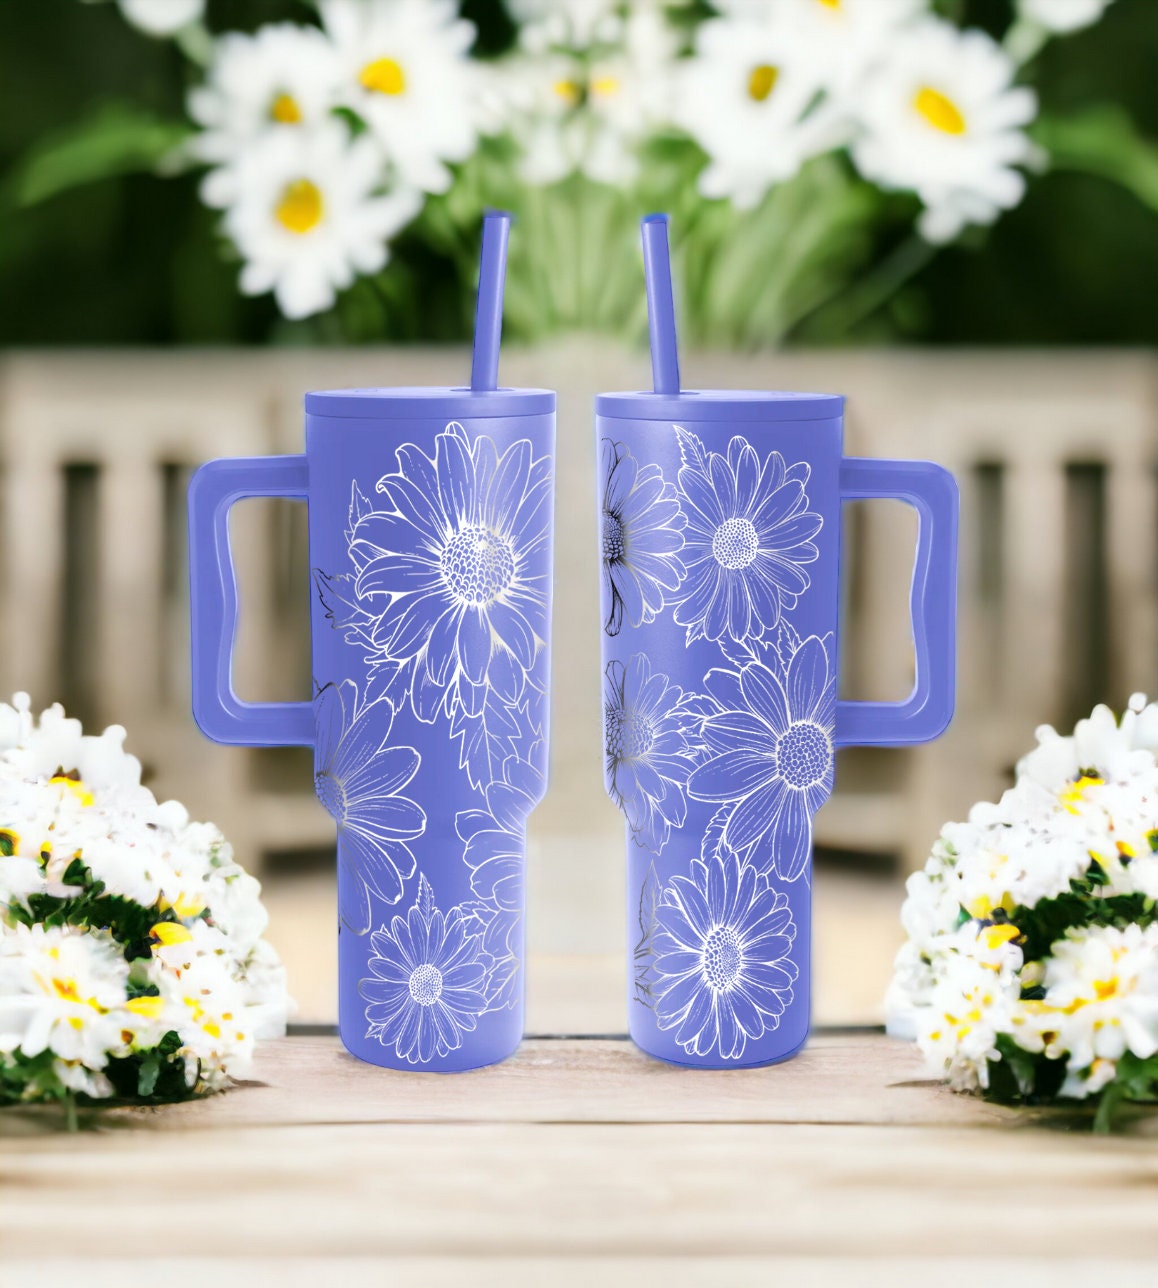 Engraved Daisies Pattern 40 Oz Stainless Steel Powder Coated